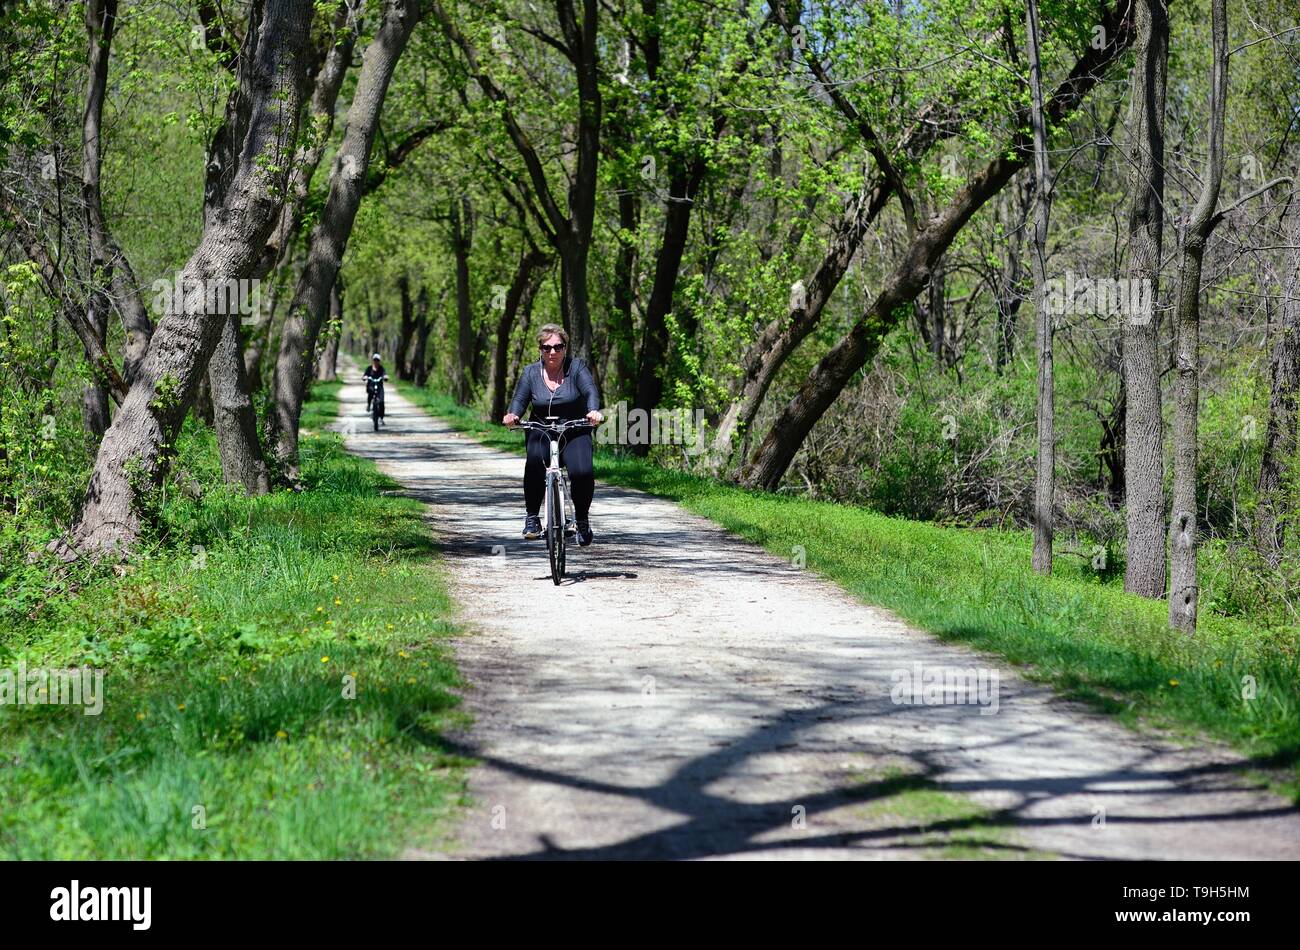 Wayne, Illinois, USA. People enjoying a bike ride on a rural path within a forest preserve. Stock Photo